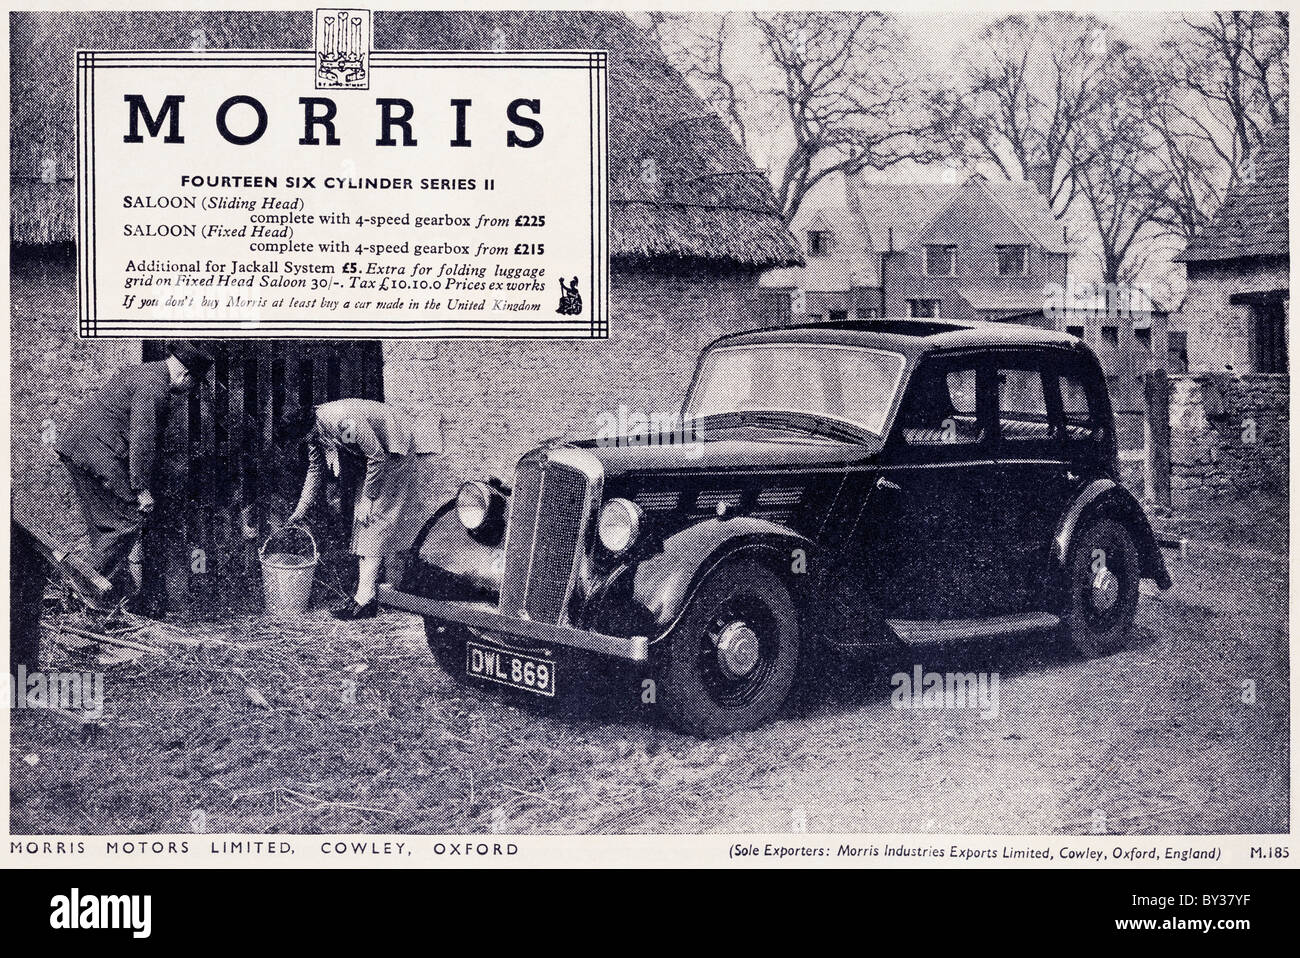 Original advert for Morris Motors Ltd Morris Fourteen Six Series 2 car manufactured from 1936 to 1939 in Cowley Oxford England Stock Photo